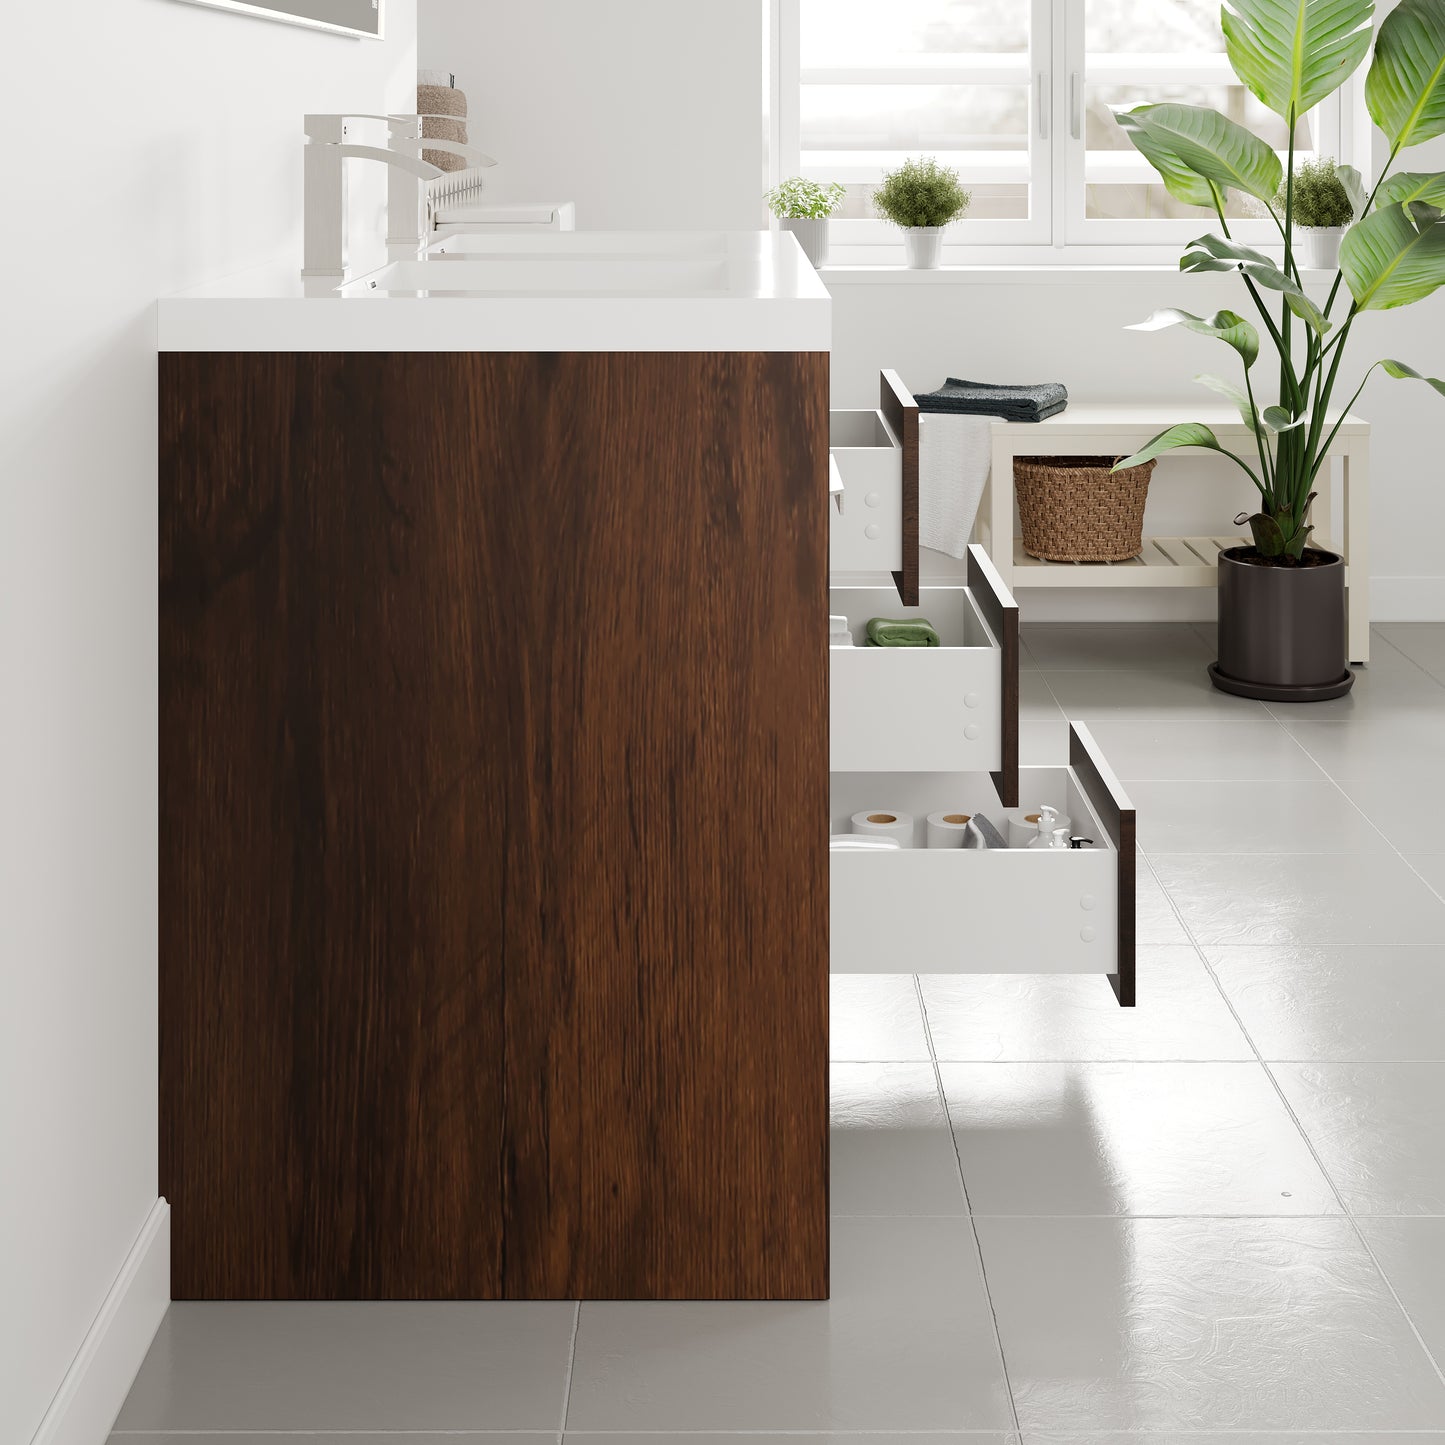 Lugano 48"W x 20" D Rosewood Double Sink Bathroom Vanity with Acrylic Countertop and Integrated Sink